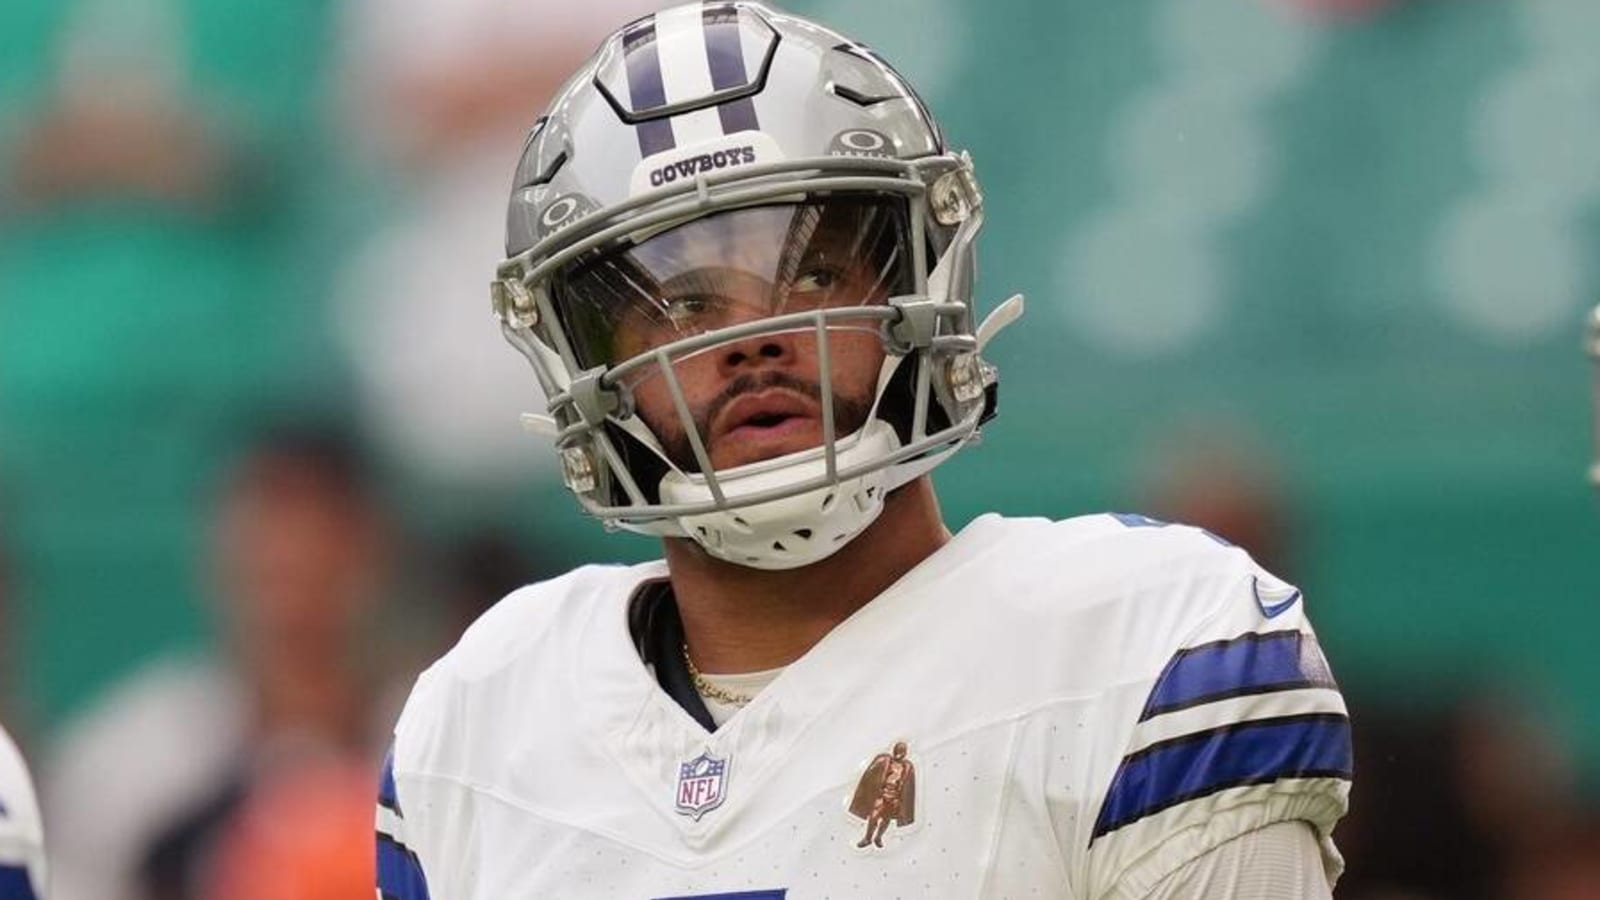 Dak Prescott’s Current Situation With the Dallas Cowboys Is Comparable to Jared Goff’s Situation With the L.A. Rams Before He Was Traded to the Detroit Lions